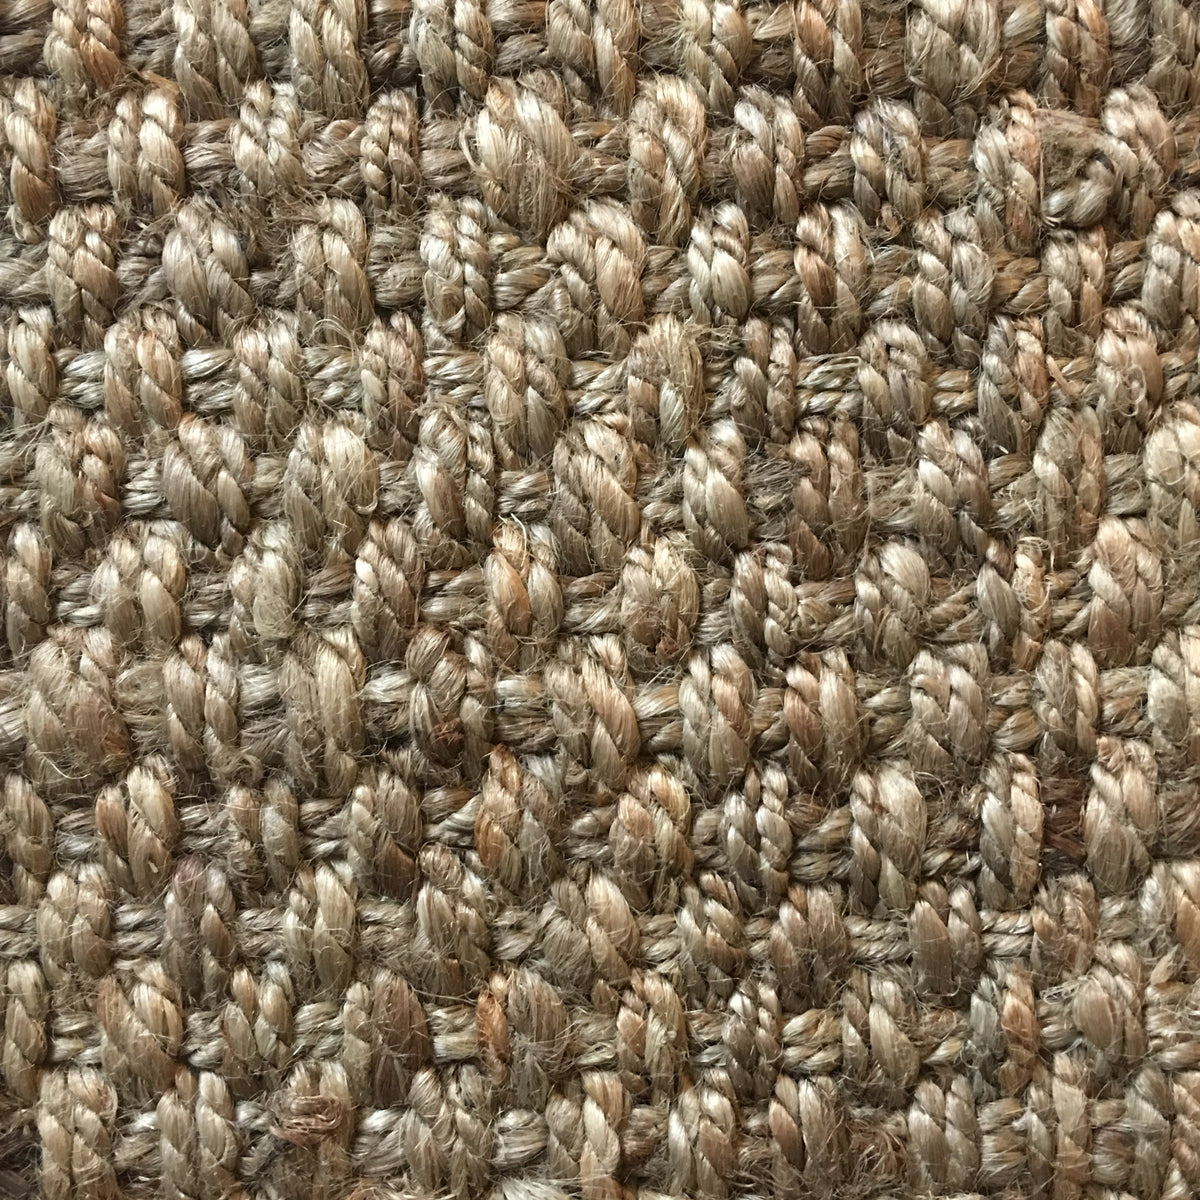 Fibreworks® Custom 100% Jute Rug with Matching Serged Border or Other Border Options- Cross Stitch 207 Taupe Grey - rugsthatfit.com